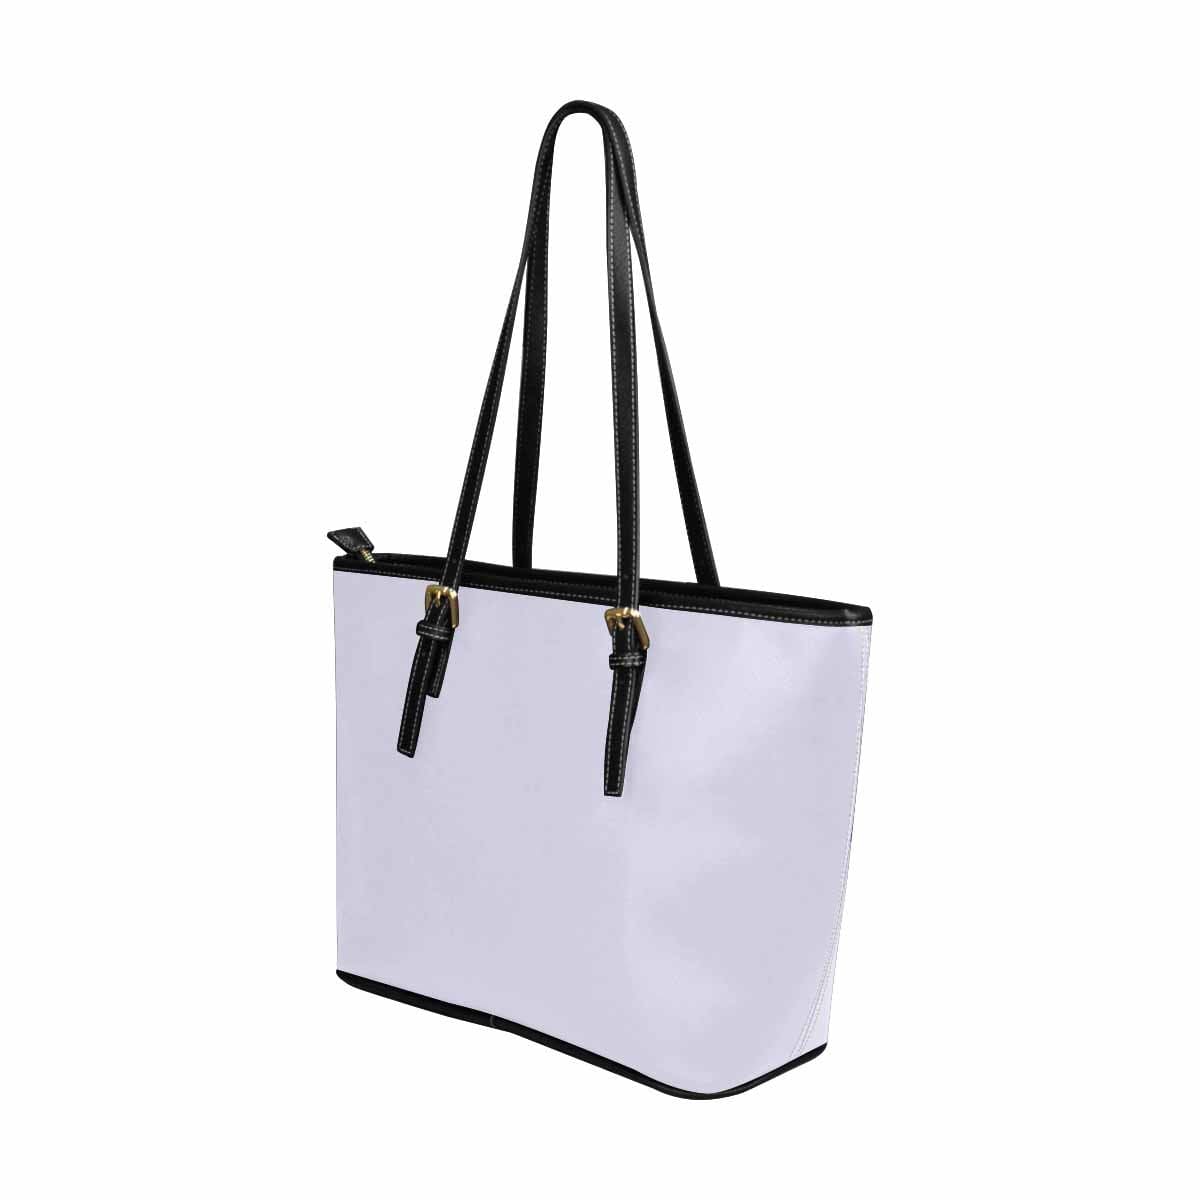 Large Leather Tote Shoulder Bag - Lavender Purple - Bags | Leather Tote Bags